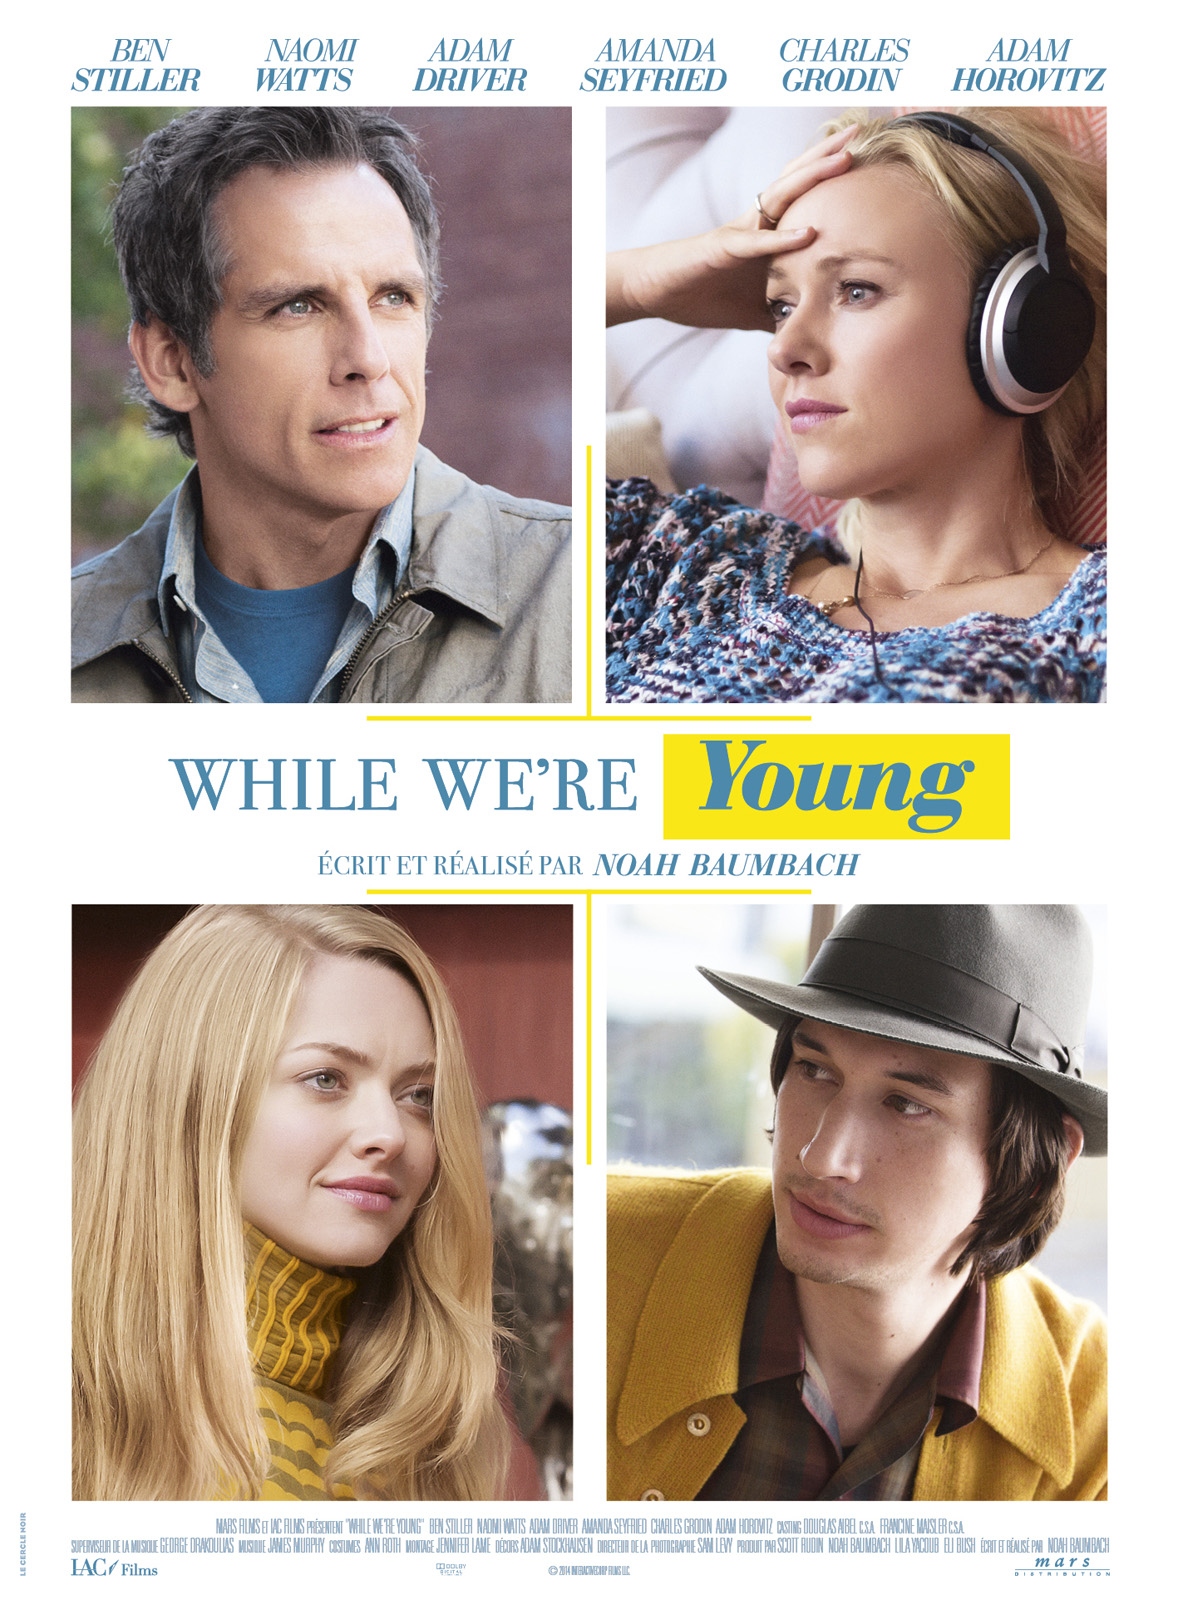 While we're young While we're young